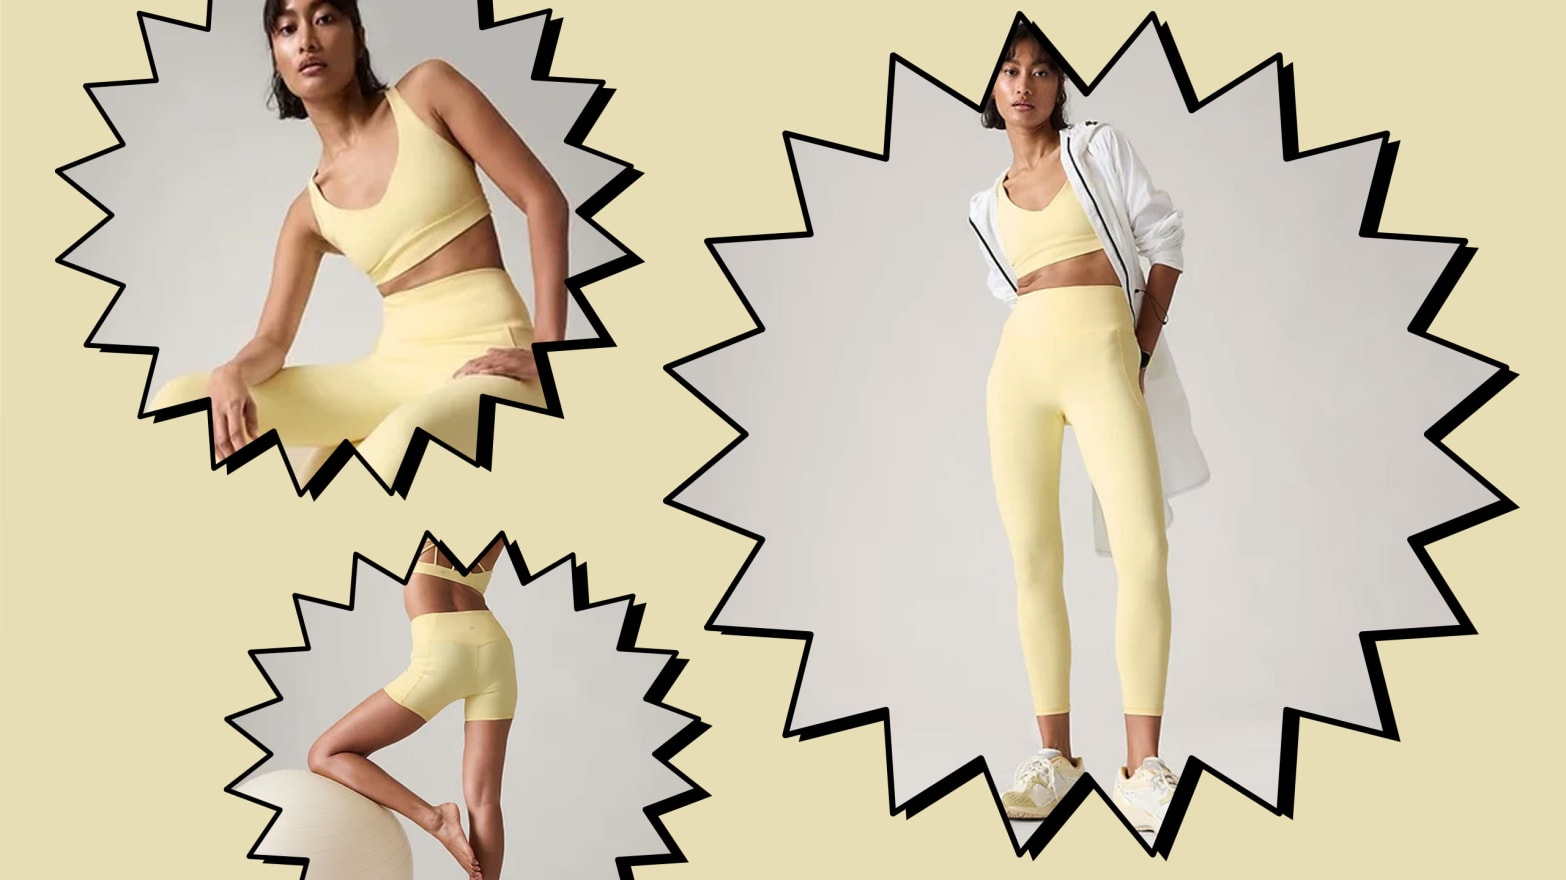 Sydney Sweeney Athleta Butter Yellow Set | Scouted, The Daily Beast